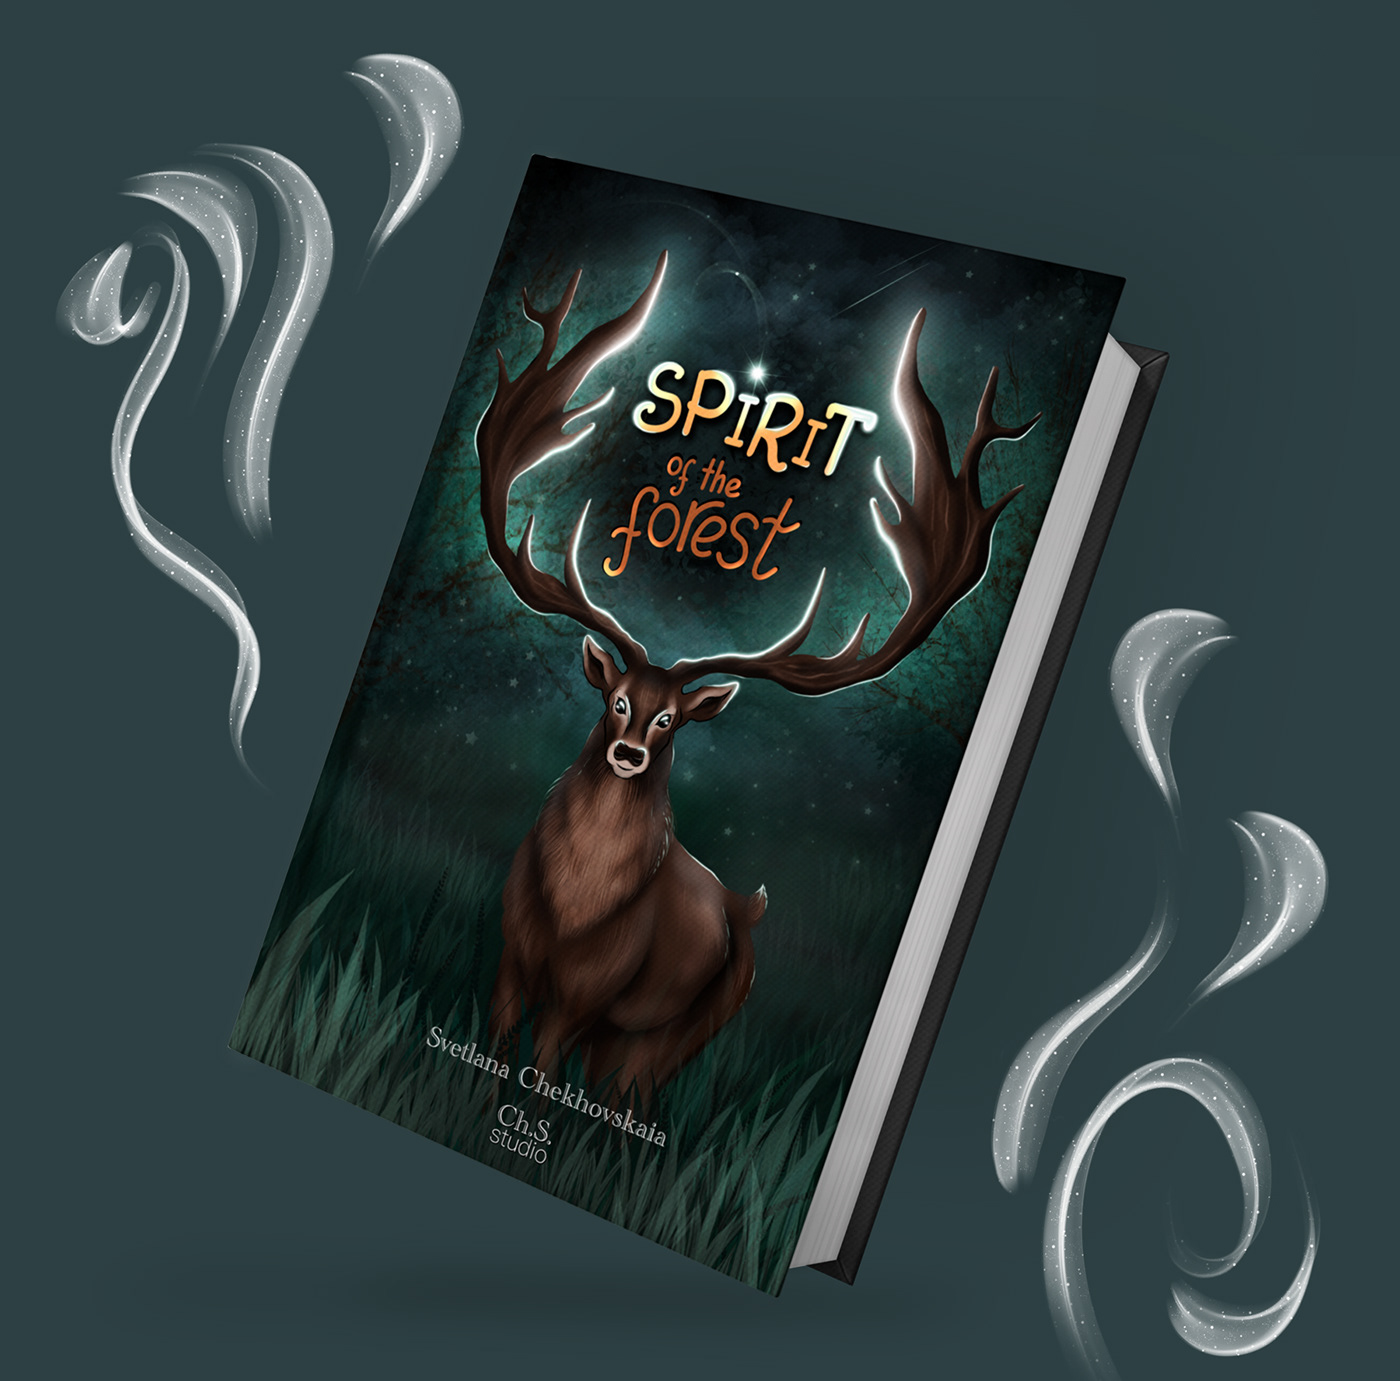 An illustration for the cover of the book "Spirit of the Forest". This is a teen novel.